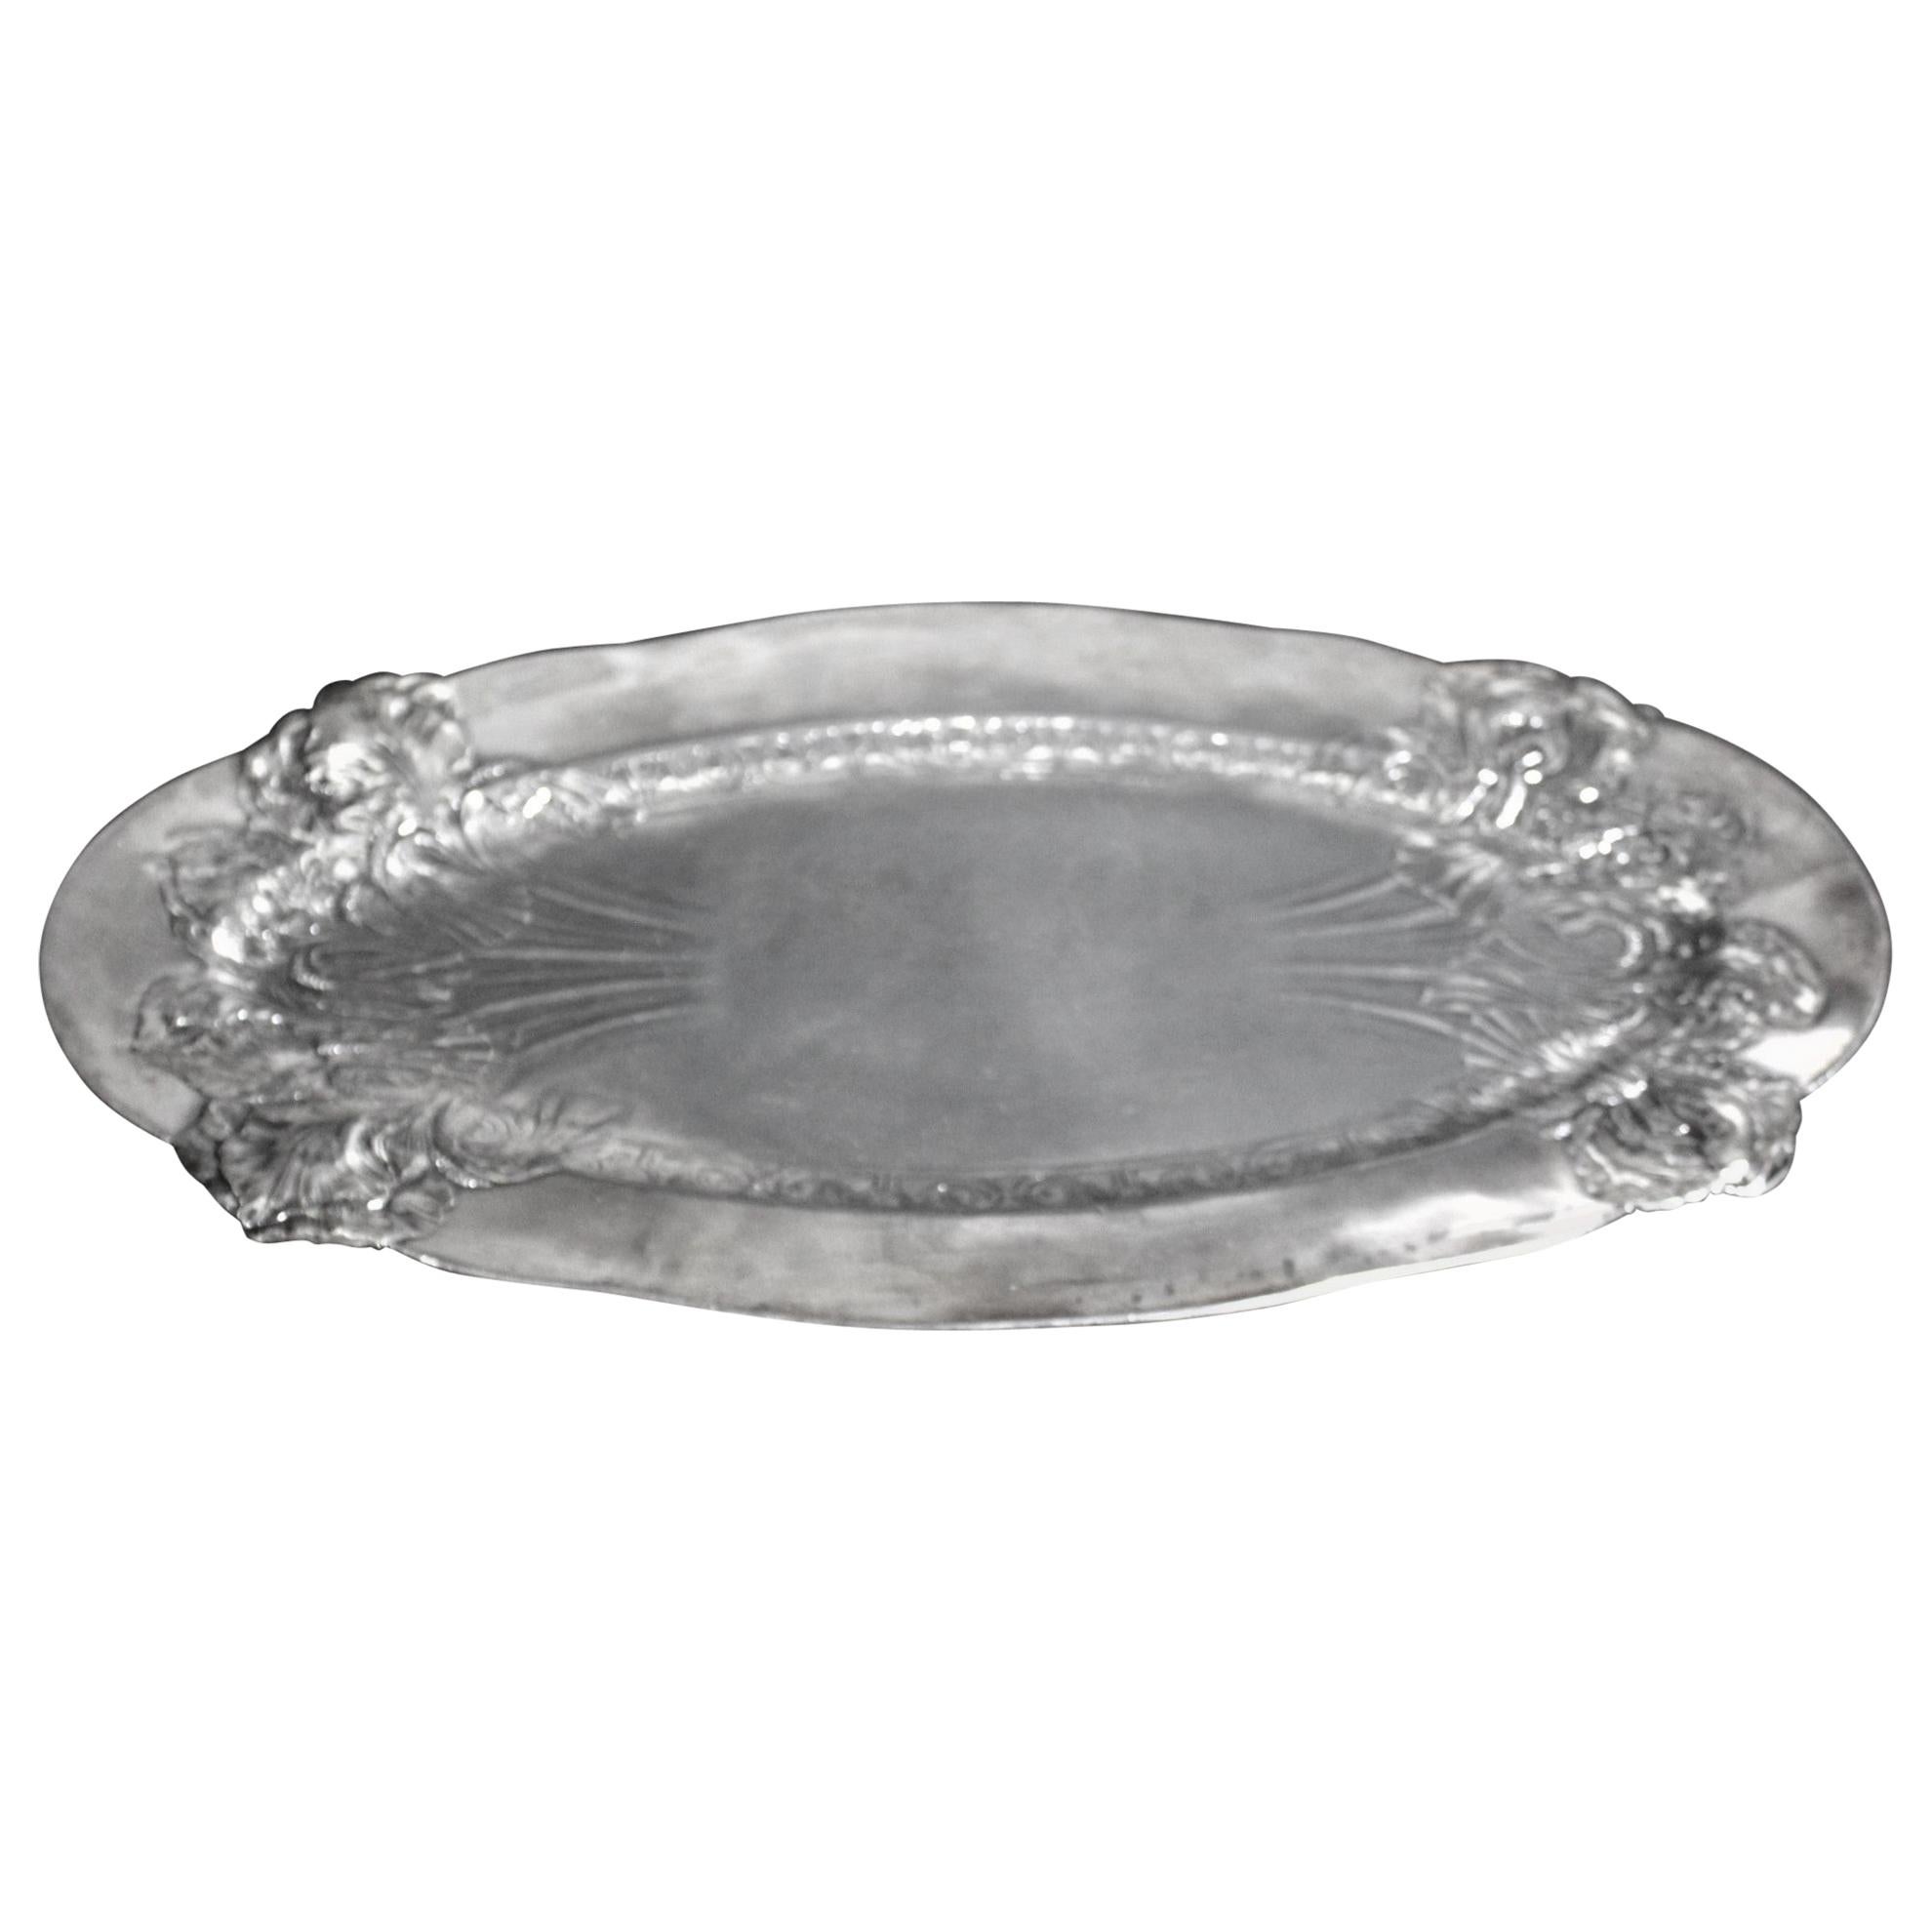 Antique Art Nouveau Silver Plated Oval Serving Tray with Raised Floral Motif For Sale